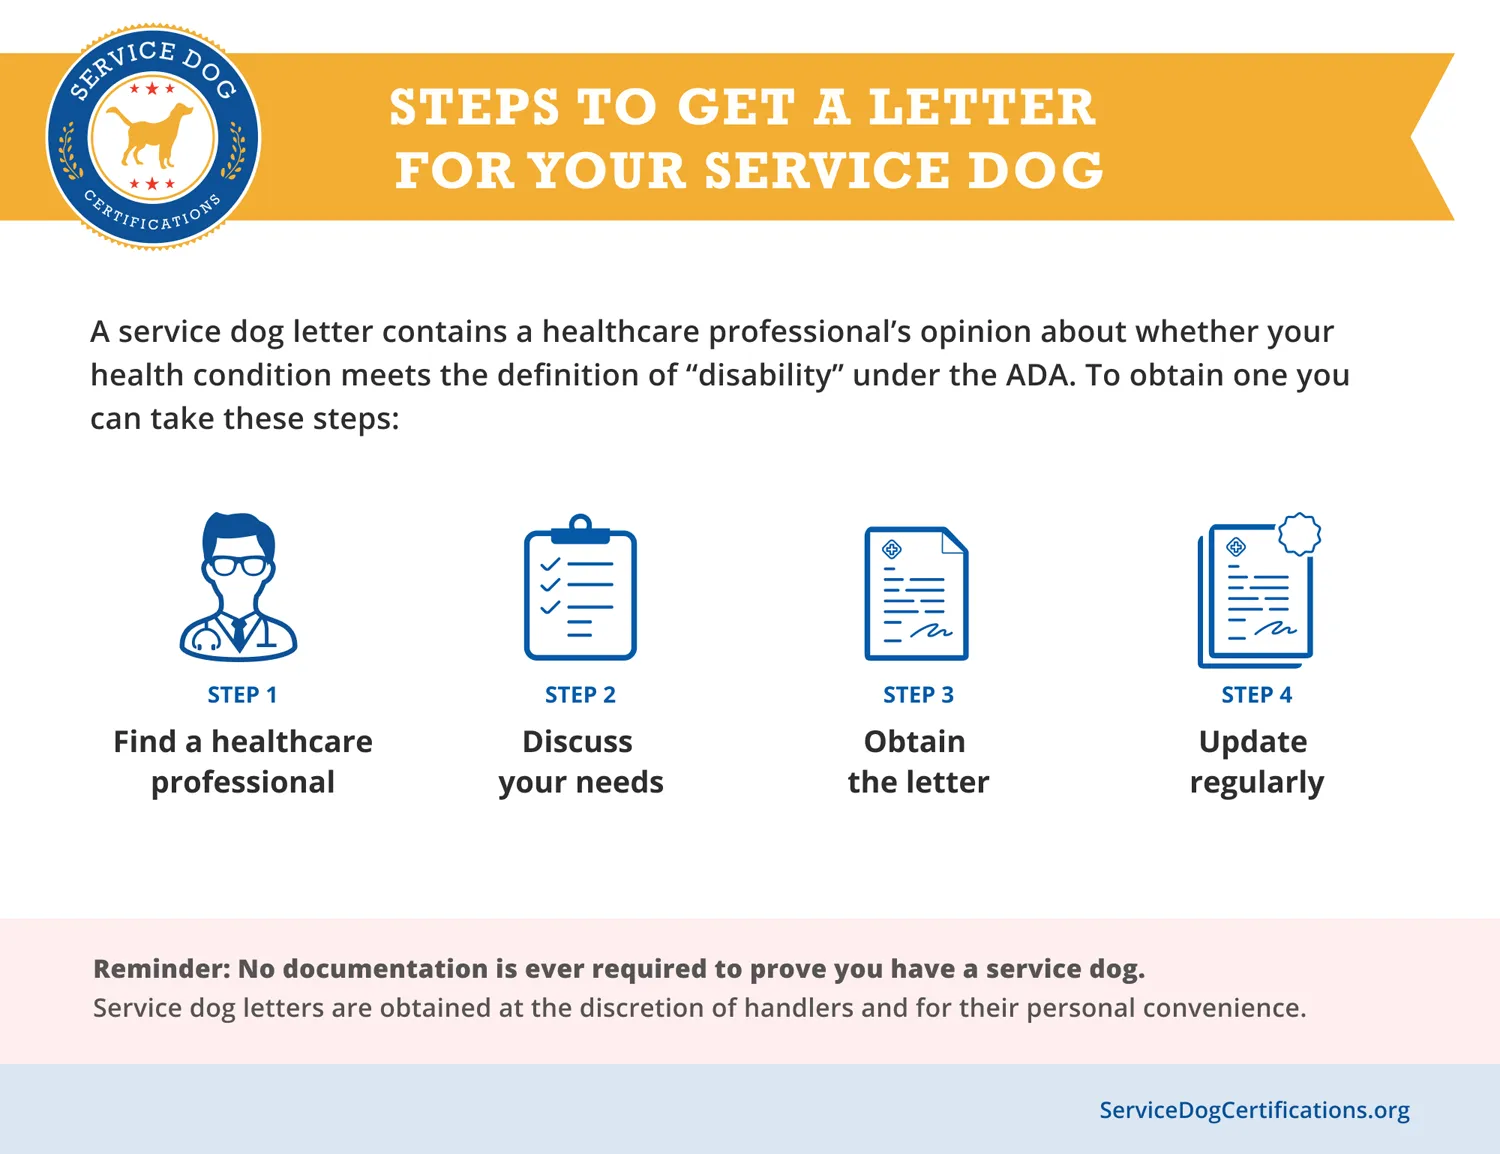 How Do I Get A Service Letter For My Dog?